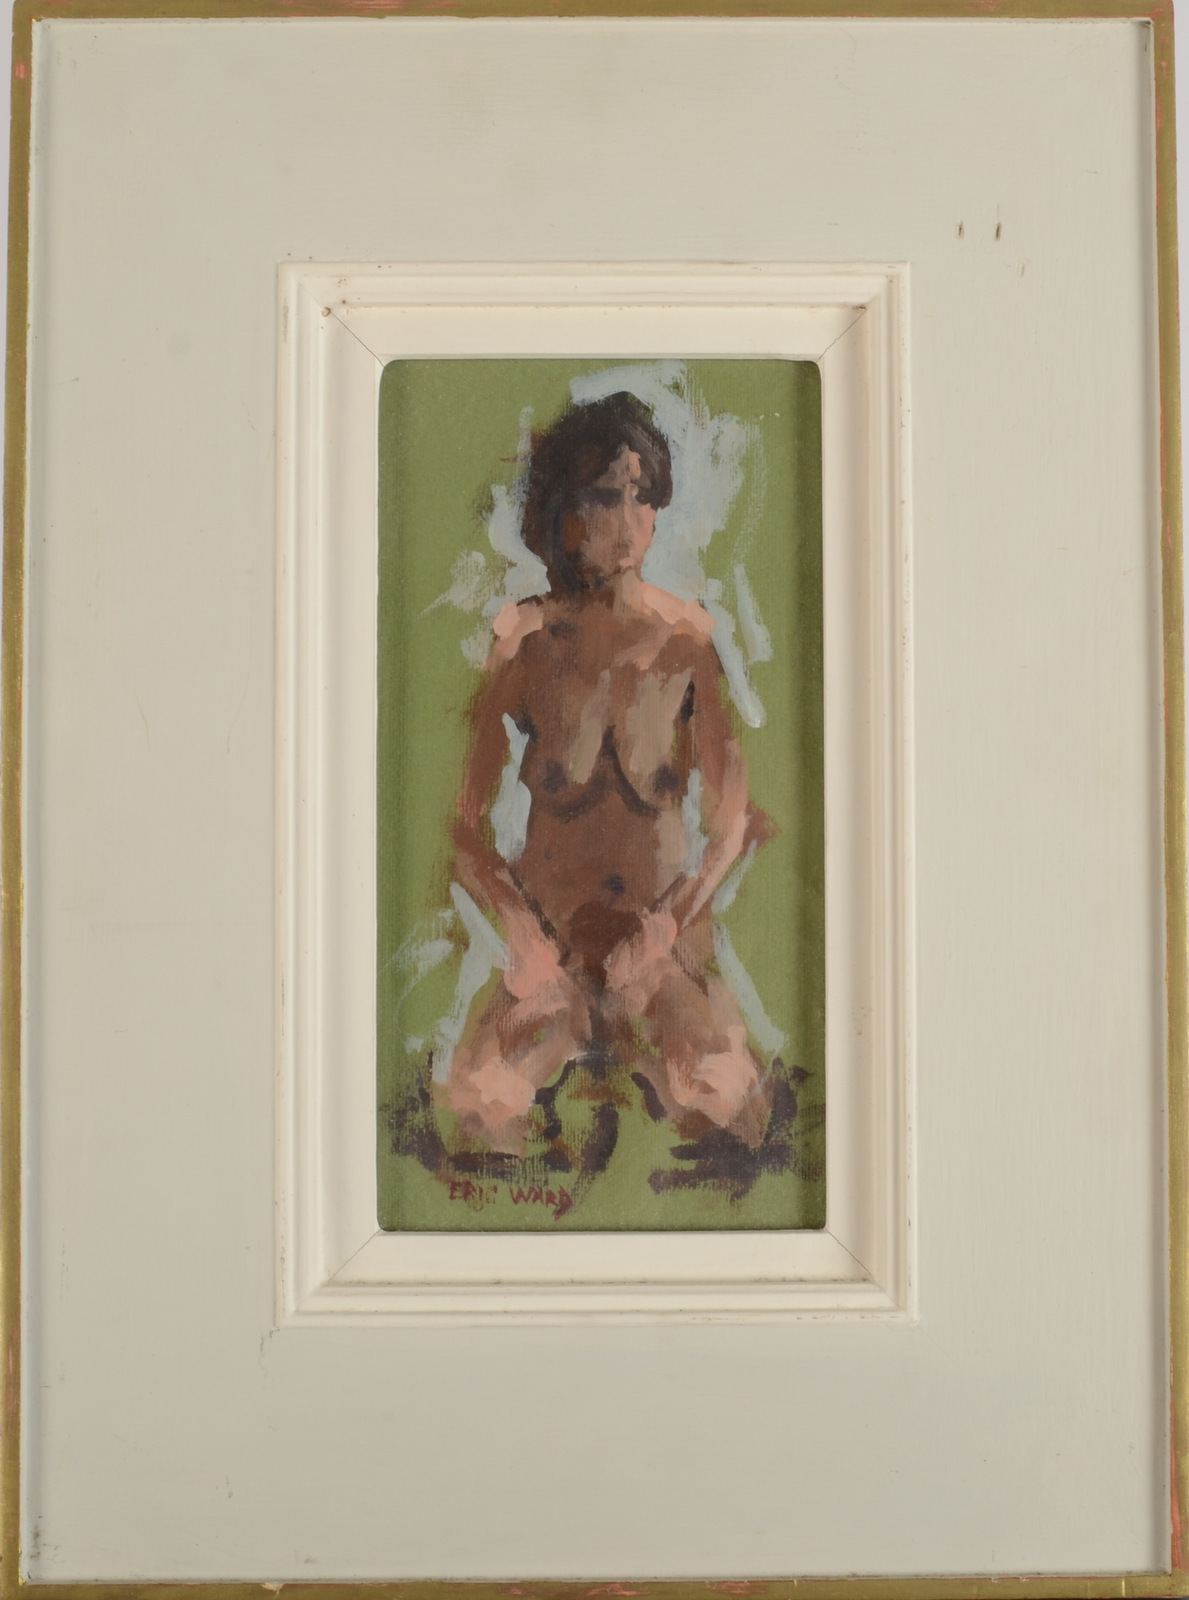 ERIC WARD Nude Study Oil on board Signed 22 x 11 cm - Image 2 of 2